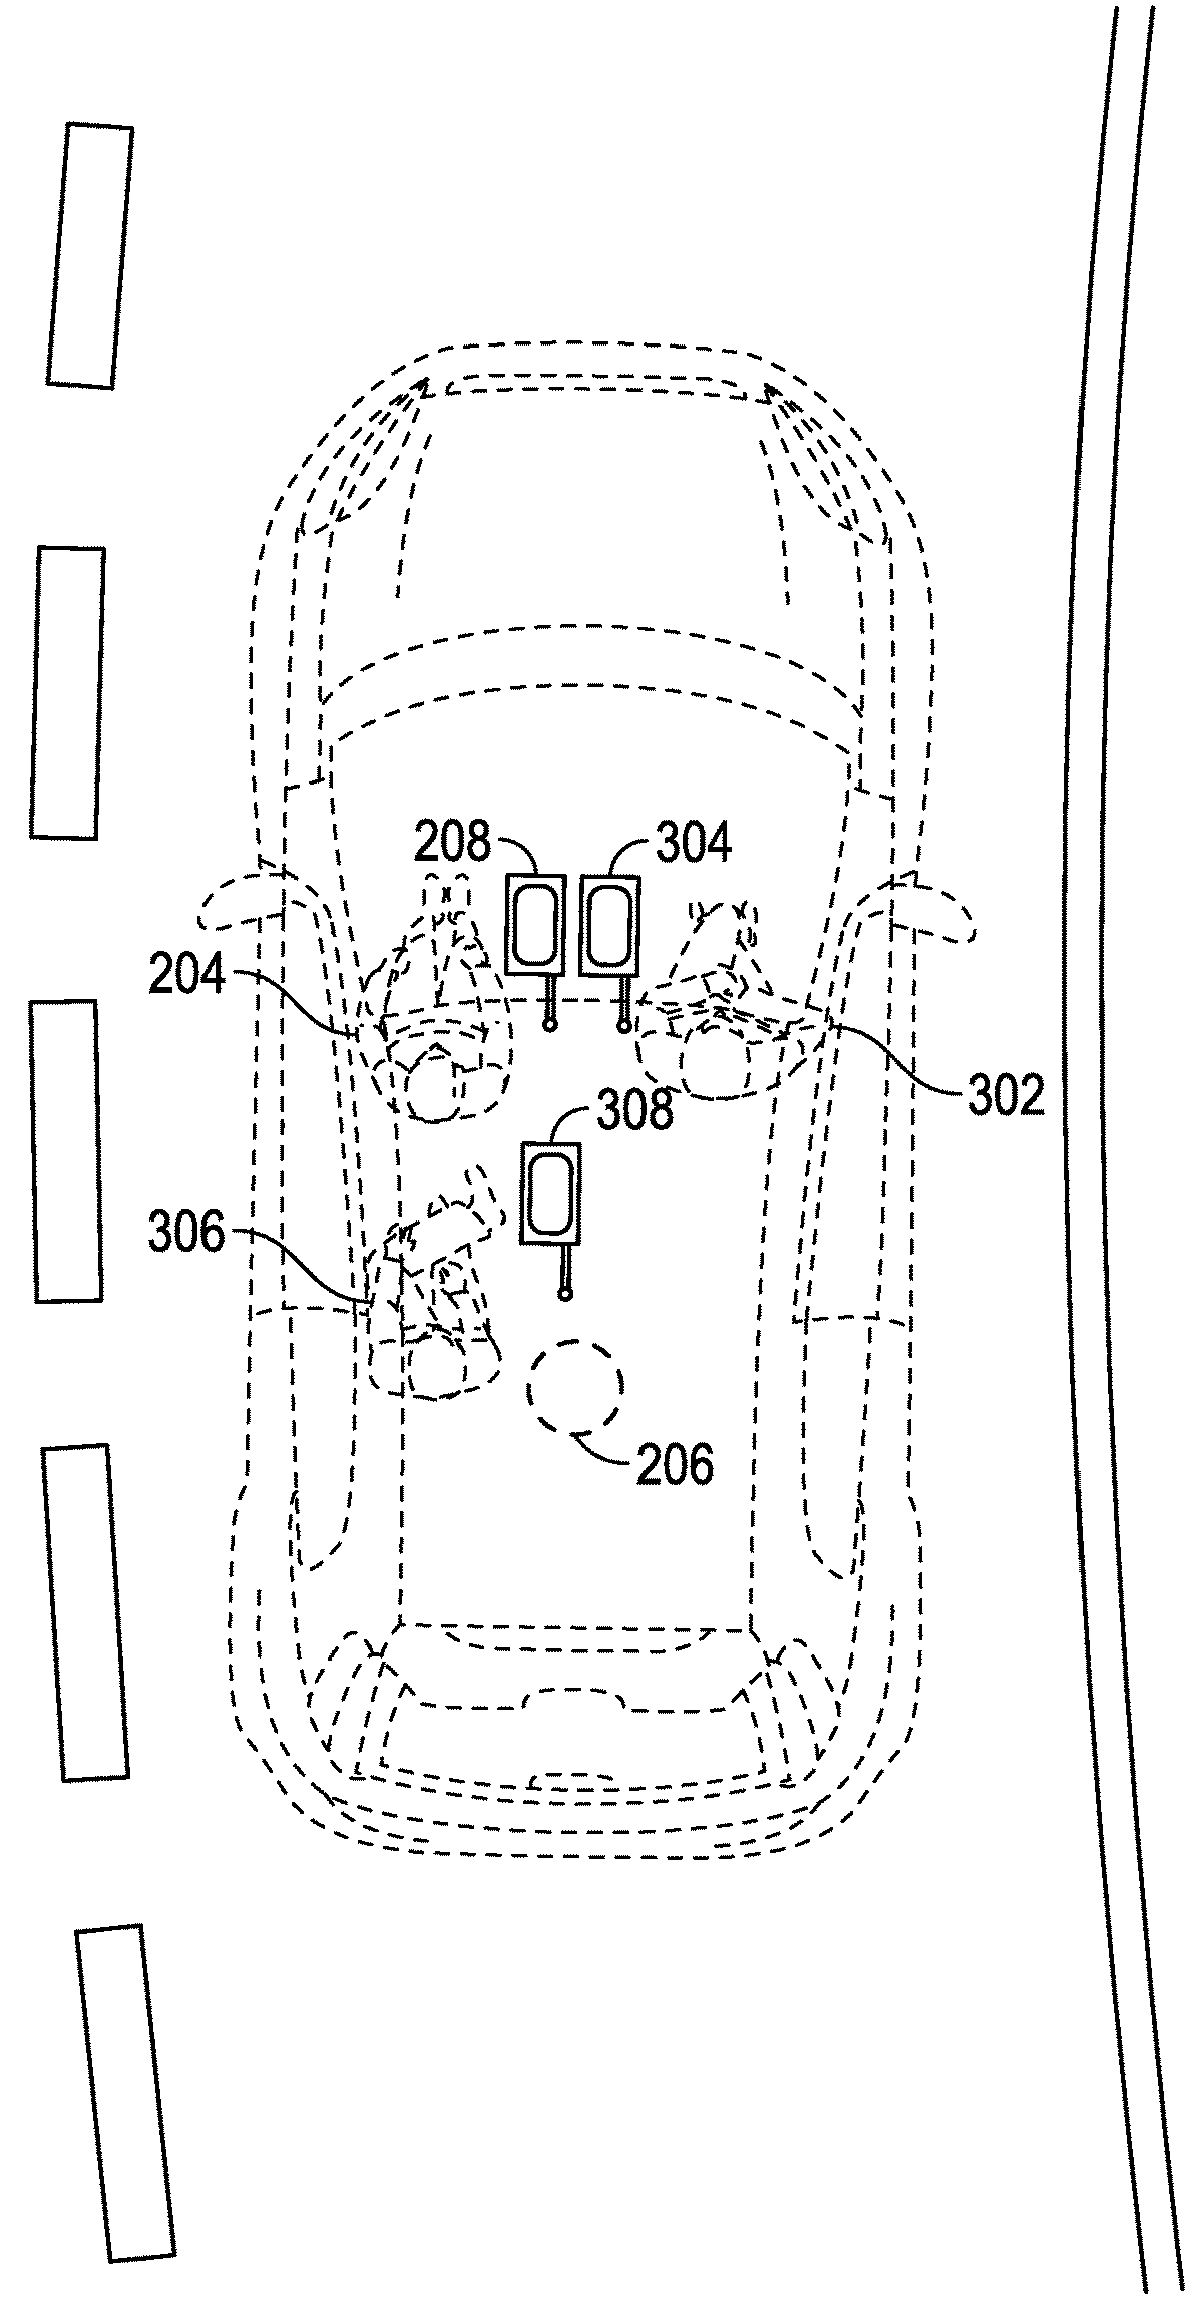 Systems and Methods for Monitoring Roadways Using Magnetic Signatures